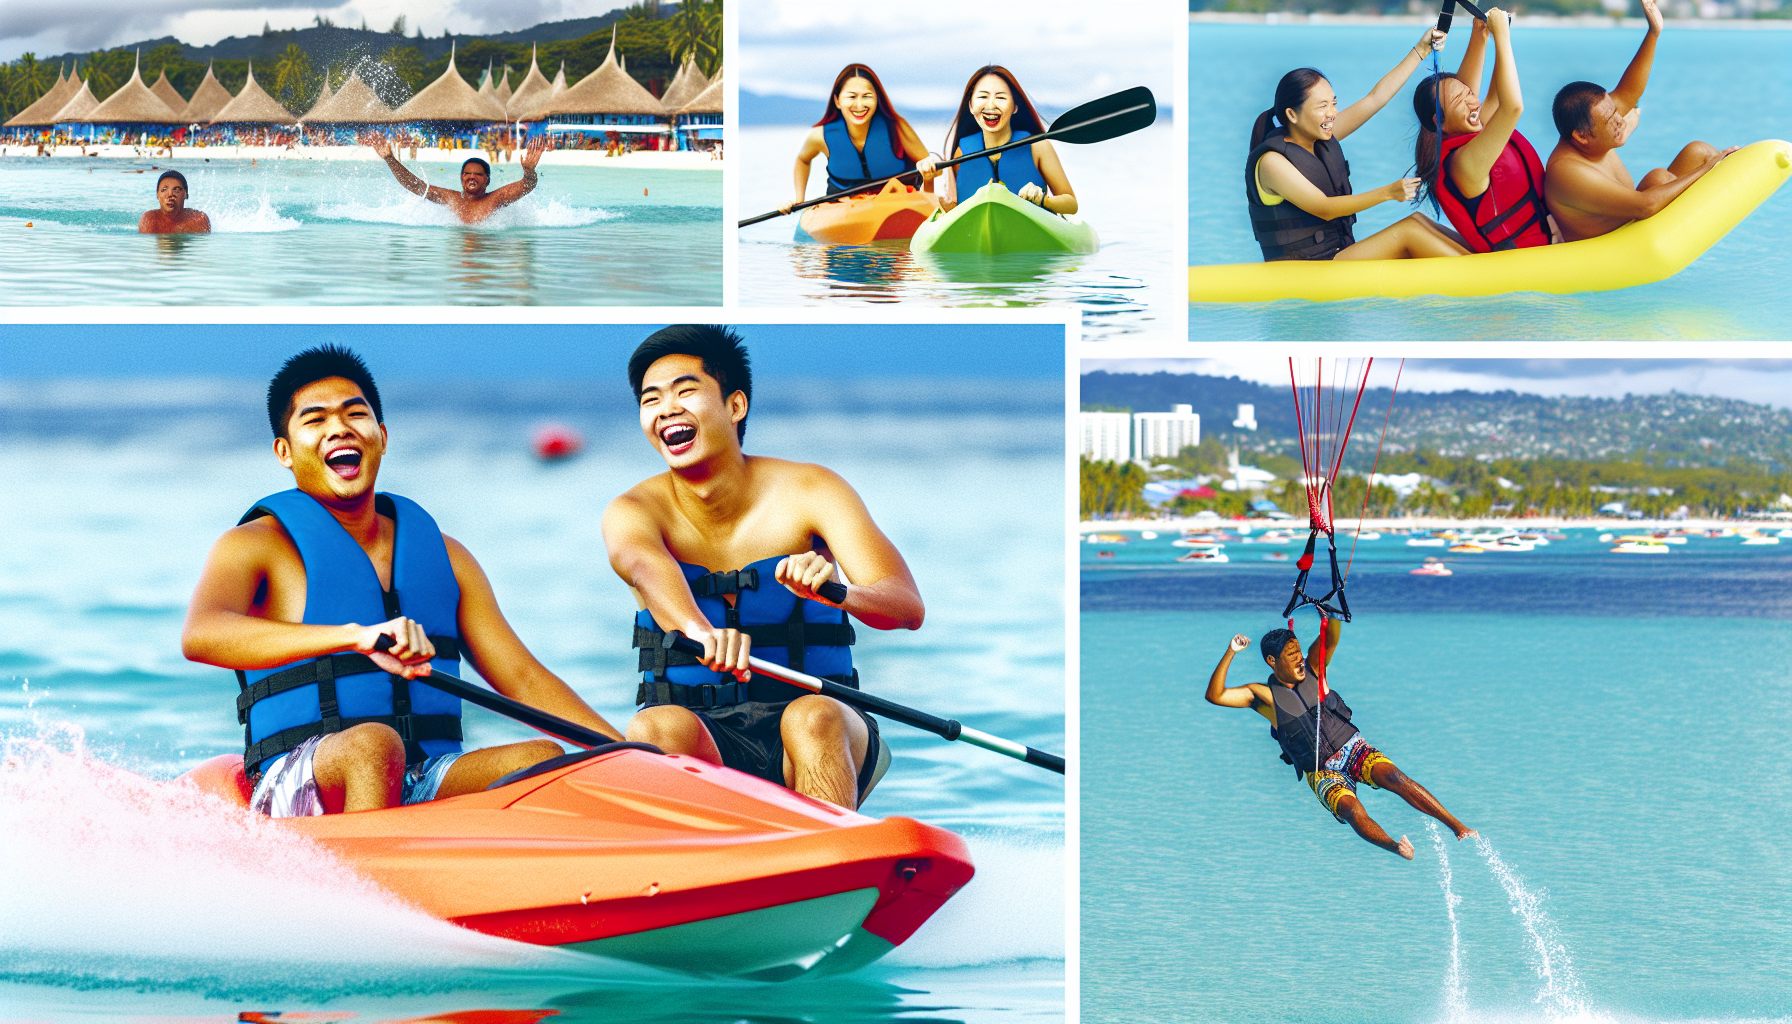 Thrilling water sports and activities in Davao's beaches